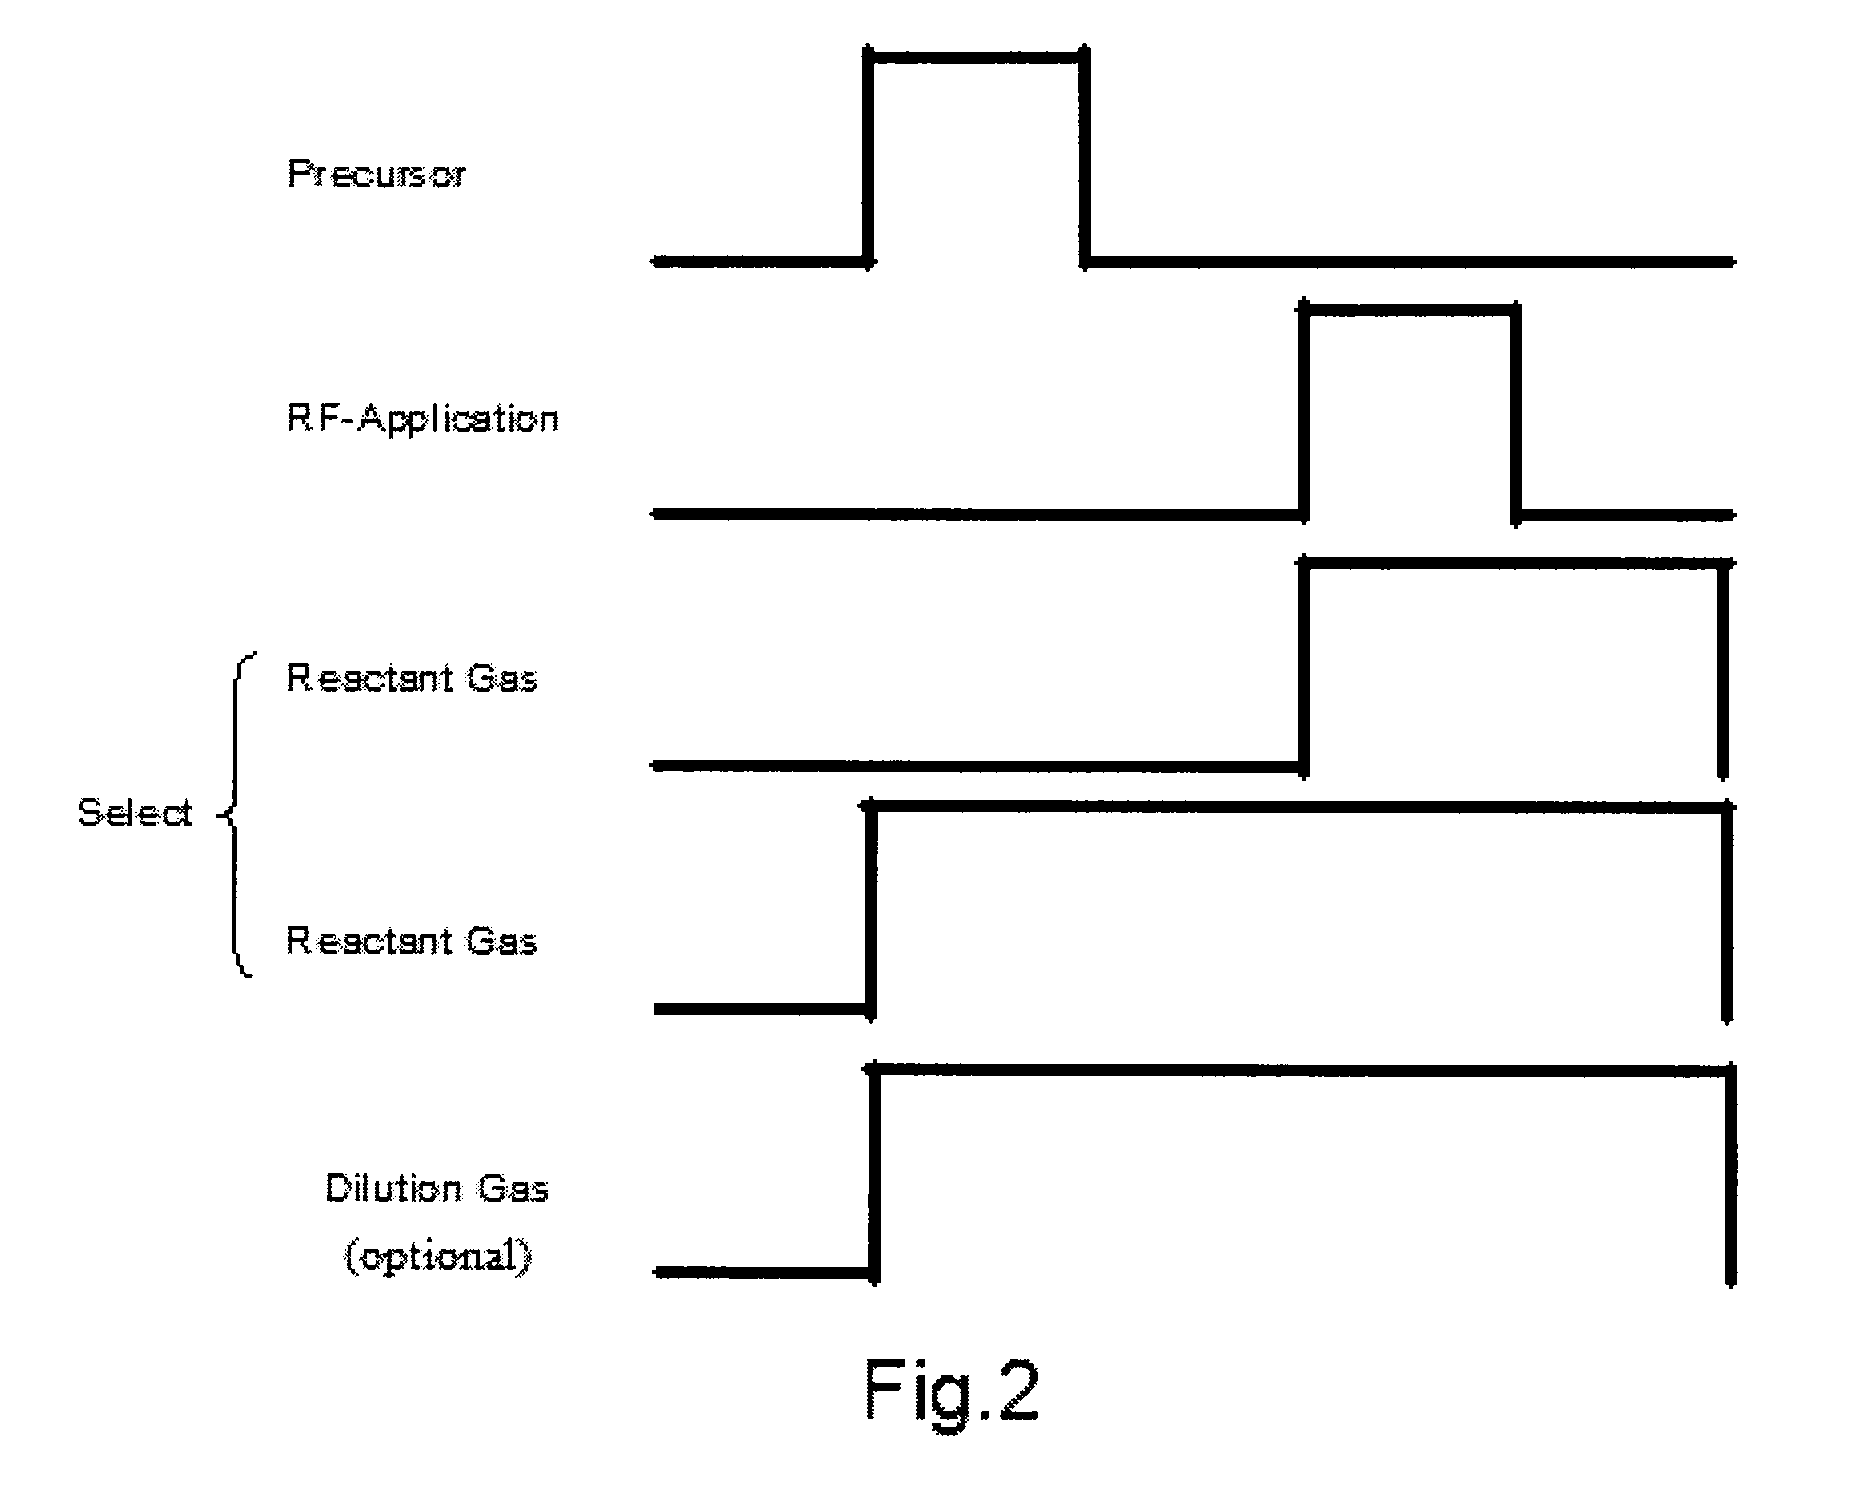 Method of depositing dielectric film by ALD using precursor containing silicon, hydrocarbon, and halogen